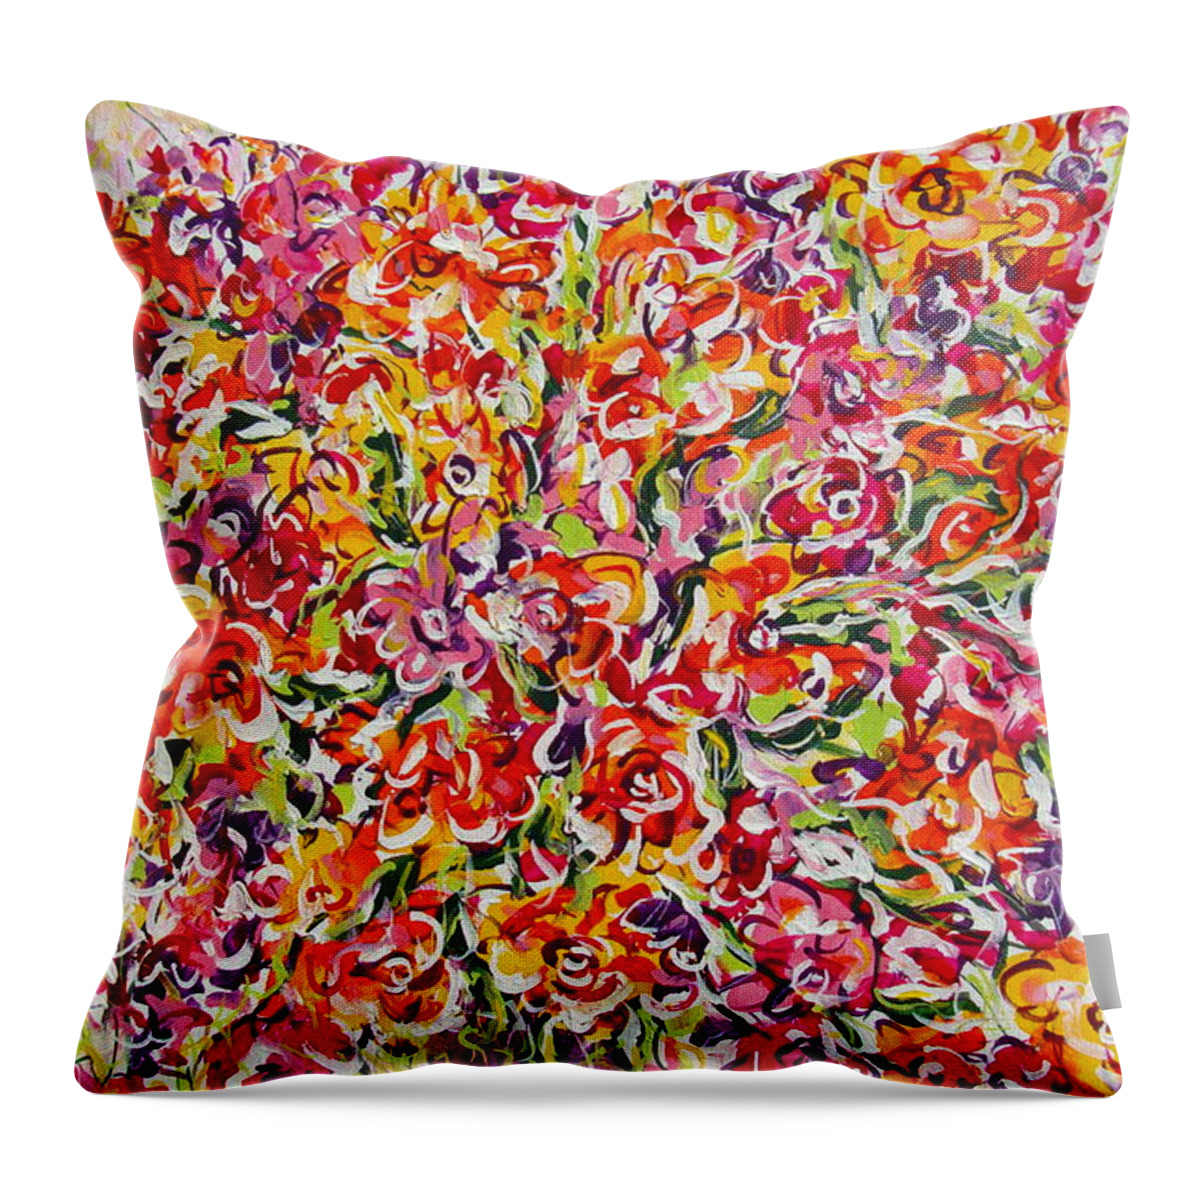 Framed Prints Throw Pillow featuring the painting Colorful Organza by Natalie Holland